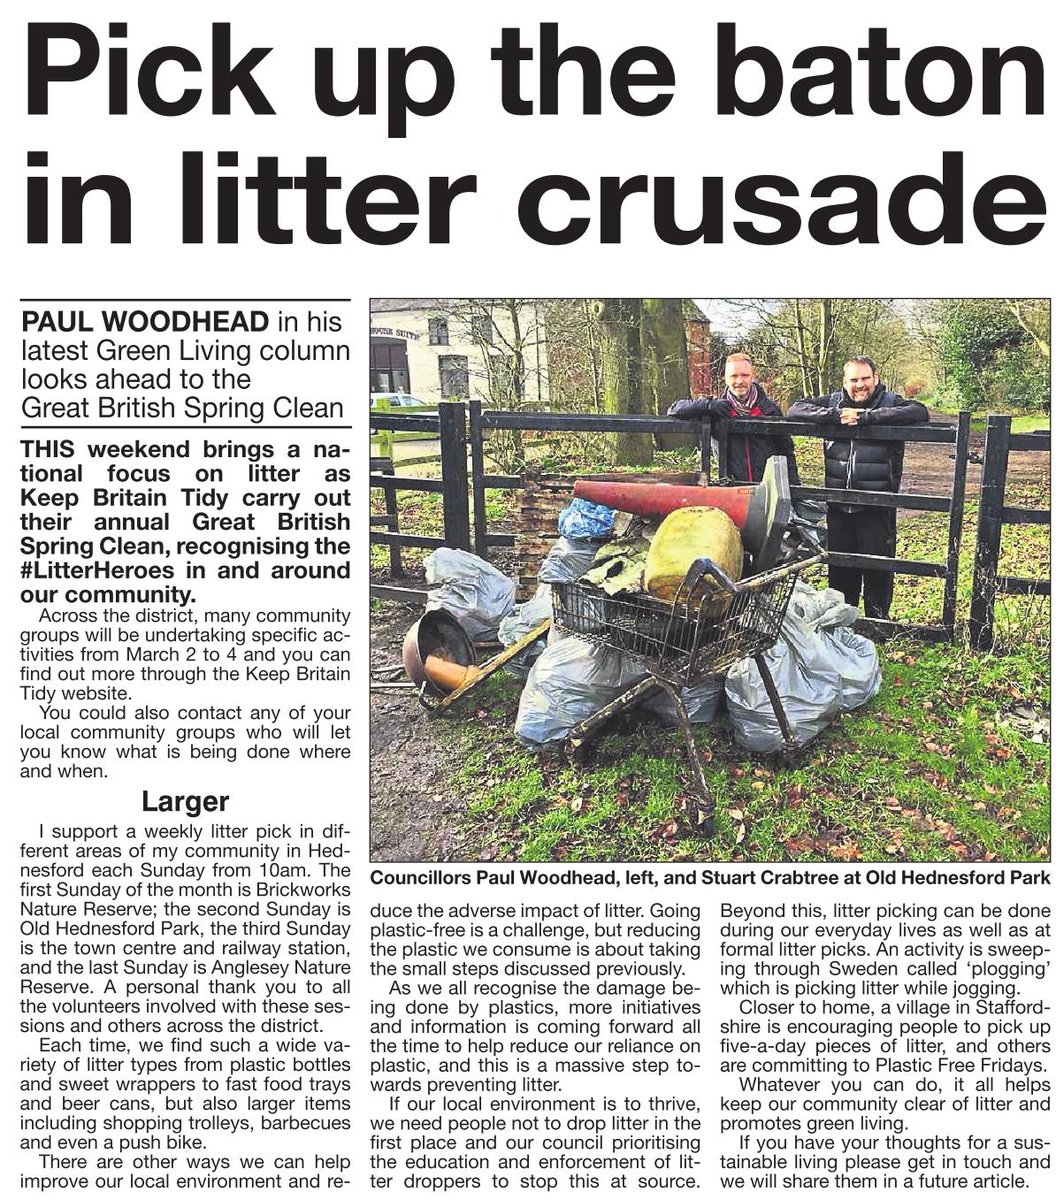 'Pick up the baton in litter crusade' - Green Councillor @paulewoodhead's latest column includes ideas like 'plogging': picking up litter while jogging @CannockChaseGP @westmidlandsgp